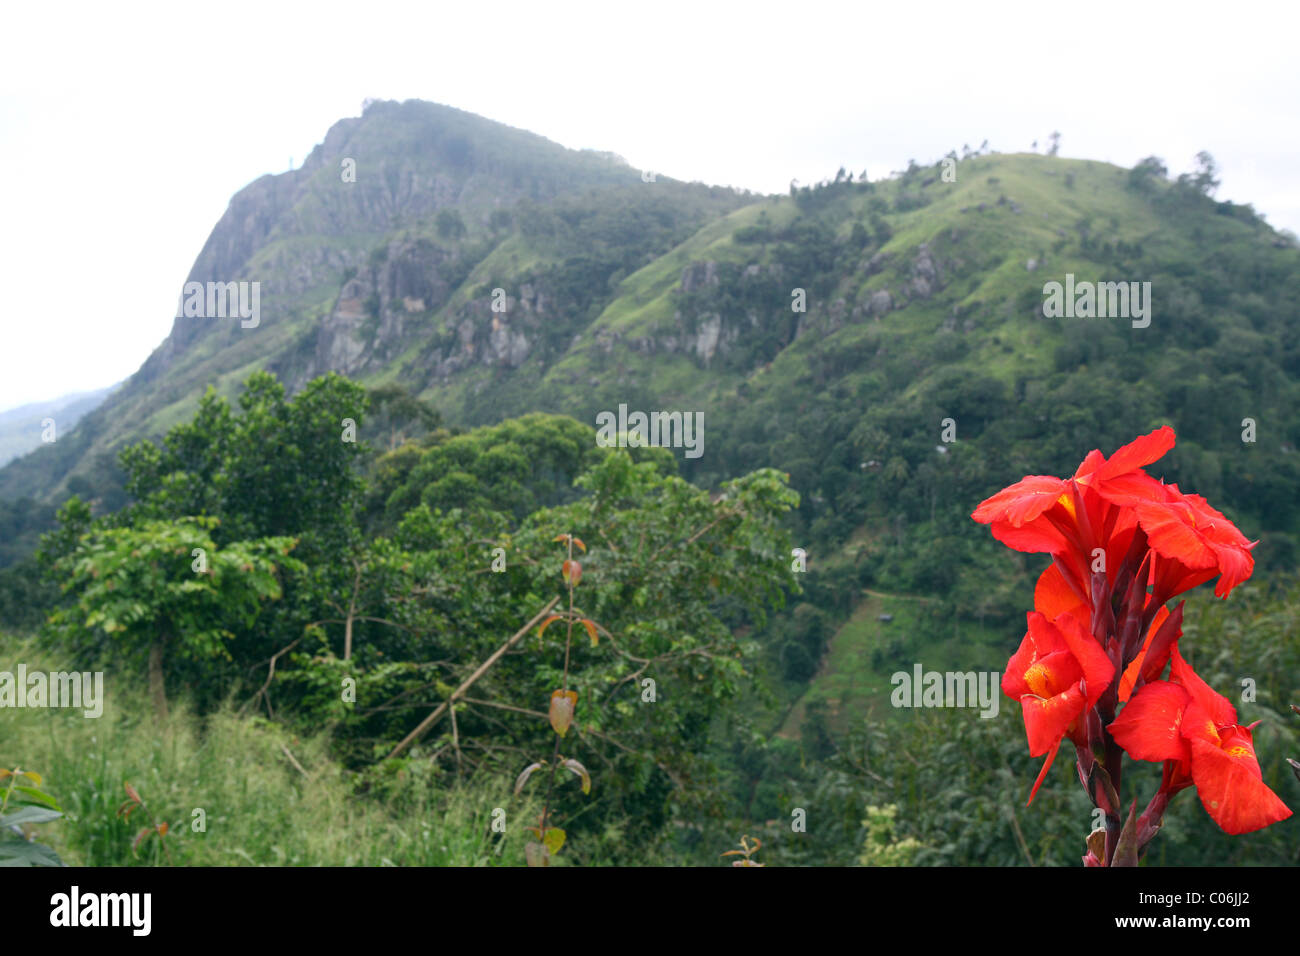 Red Gladiolus flower with a mountain in the background, Sri Lanka Stock Photo